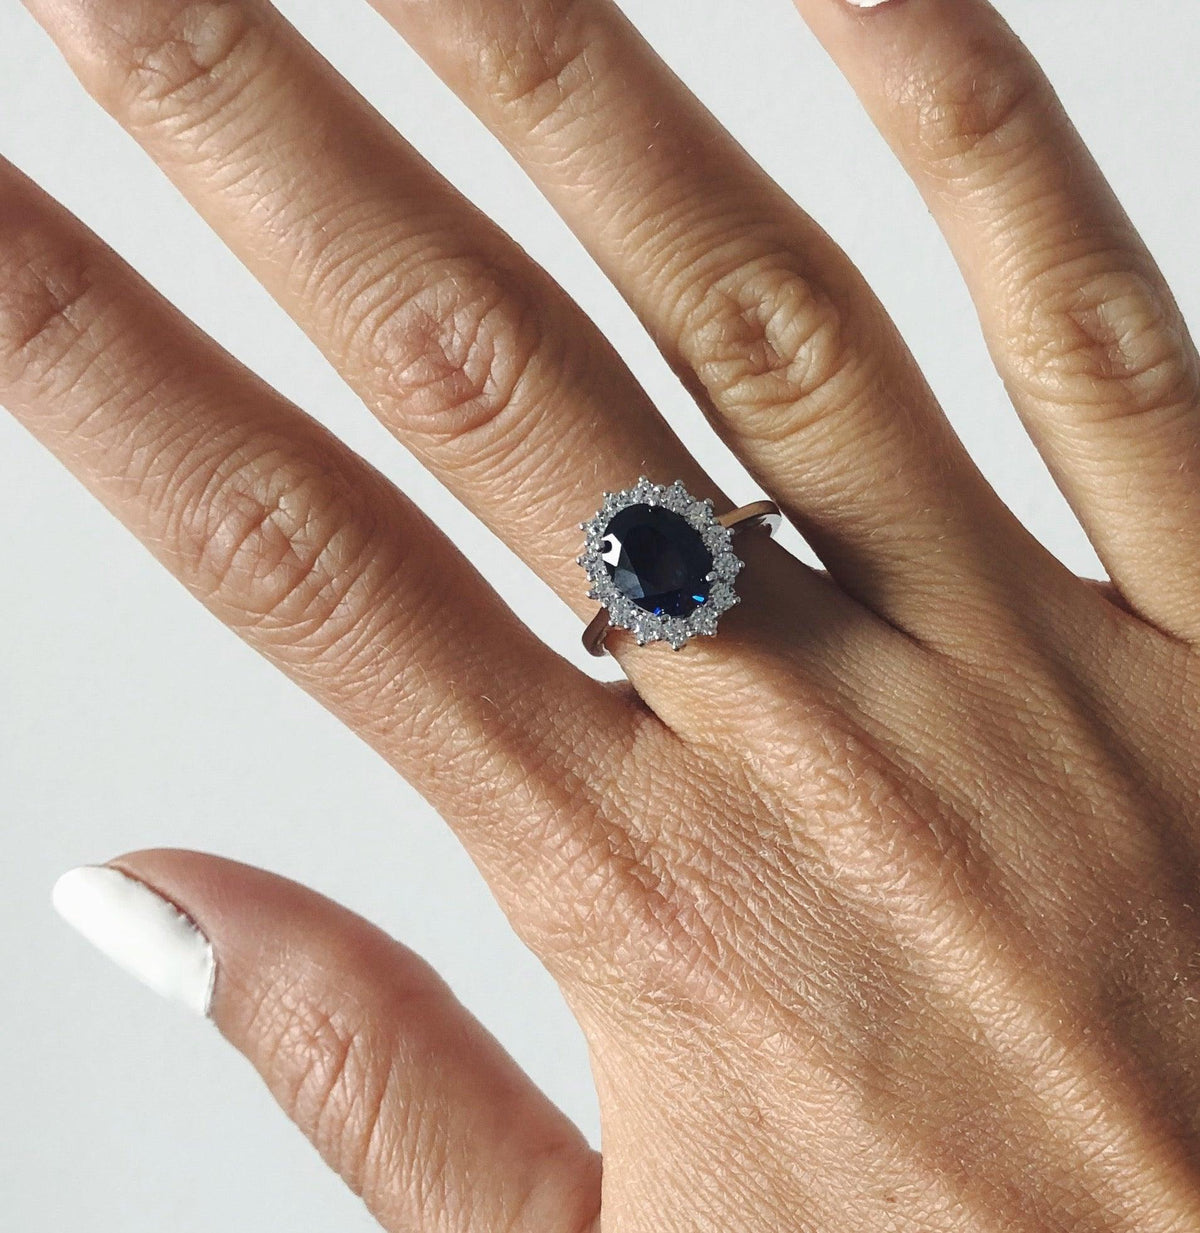  Vintage Style Oval Blue Sapphire Ring On A Woman's Hand